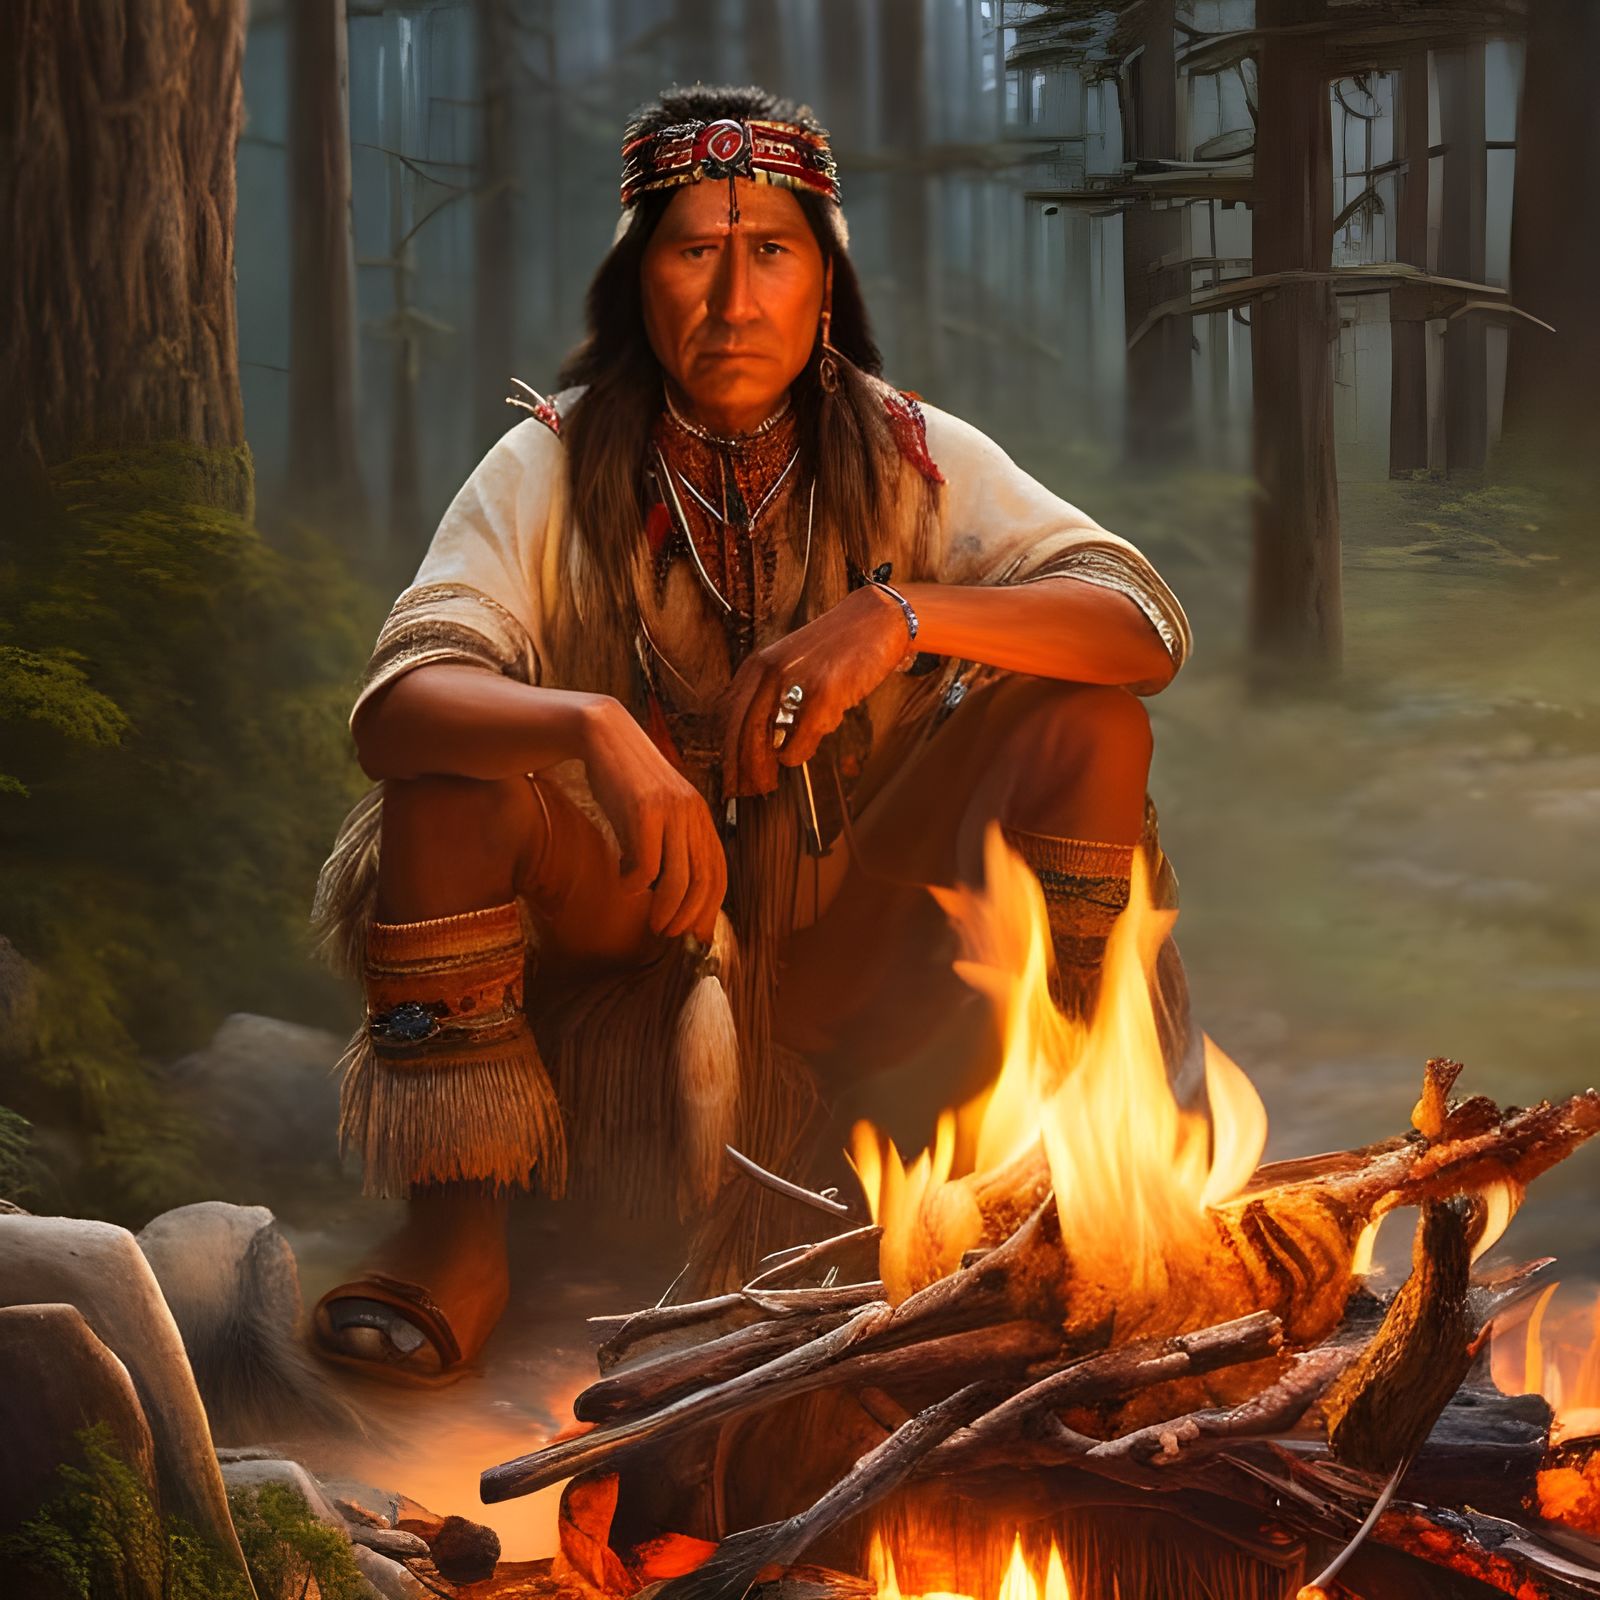 A Native American sitting at a campfire